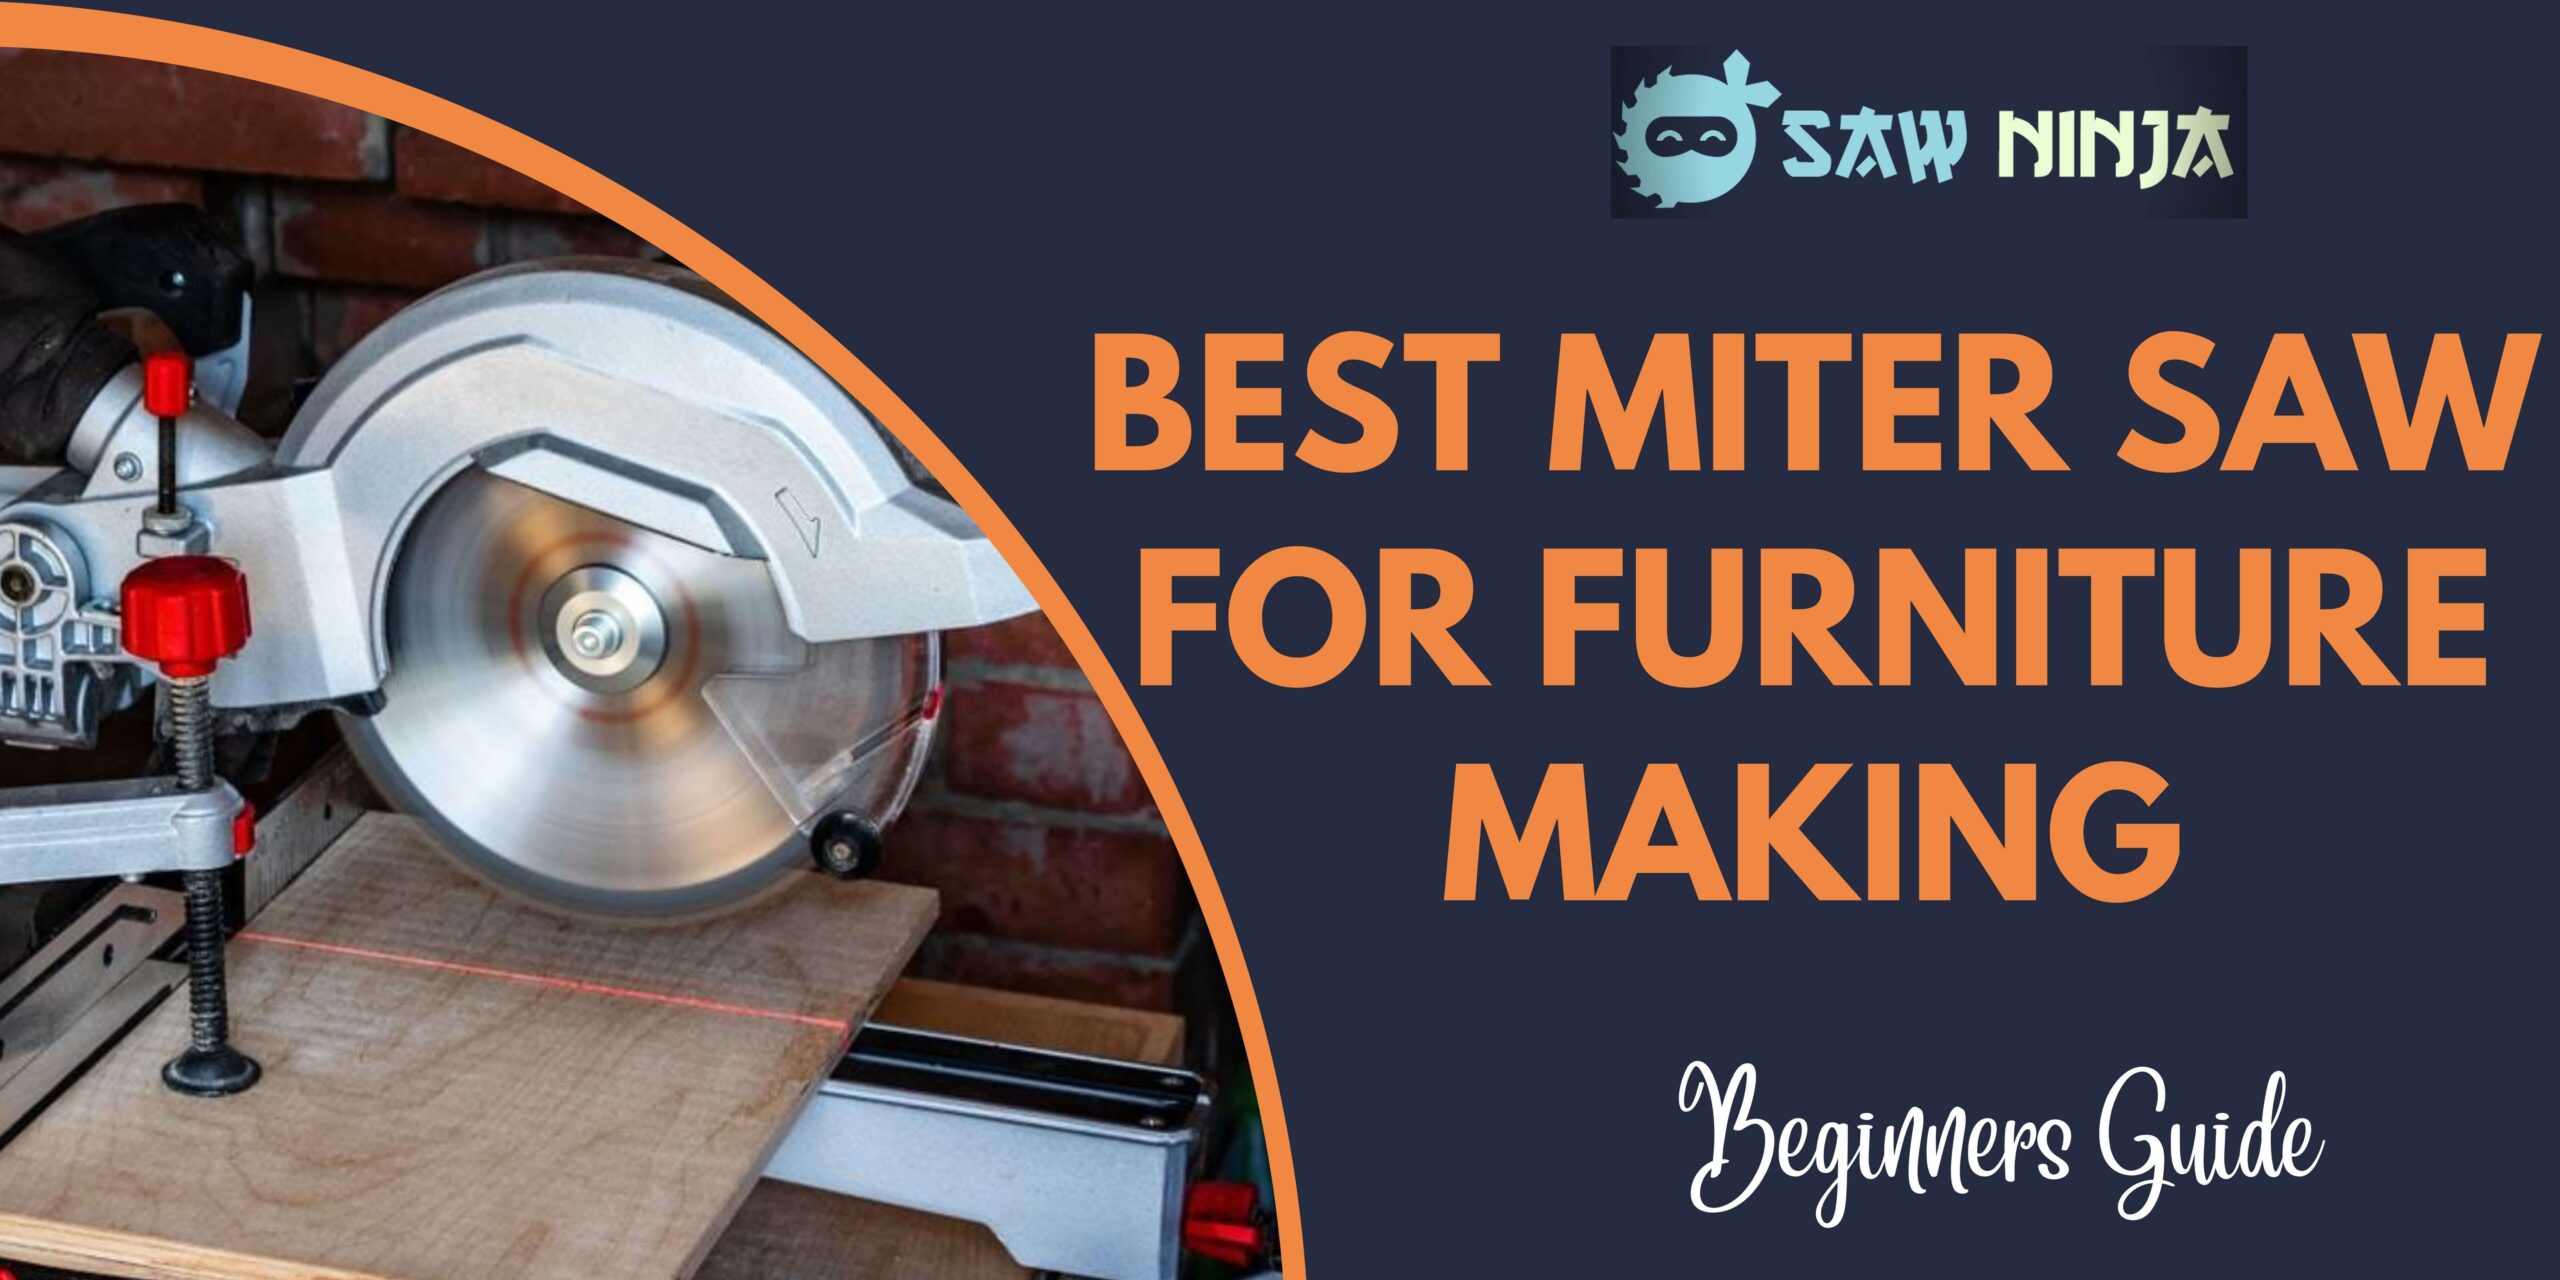 Best Miter Saw for Furniture Making